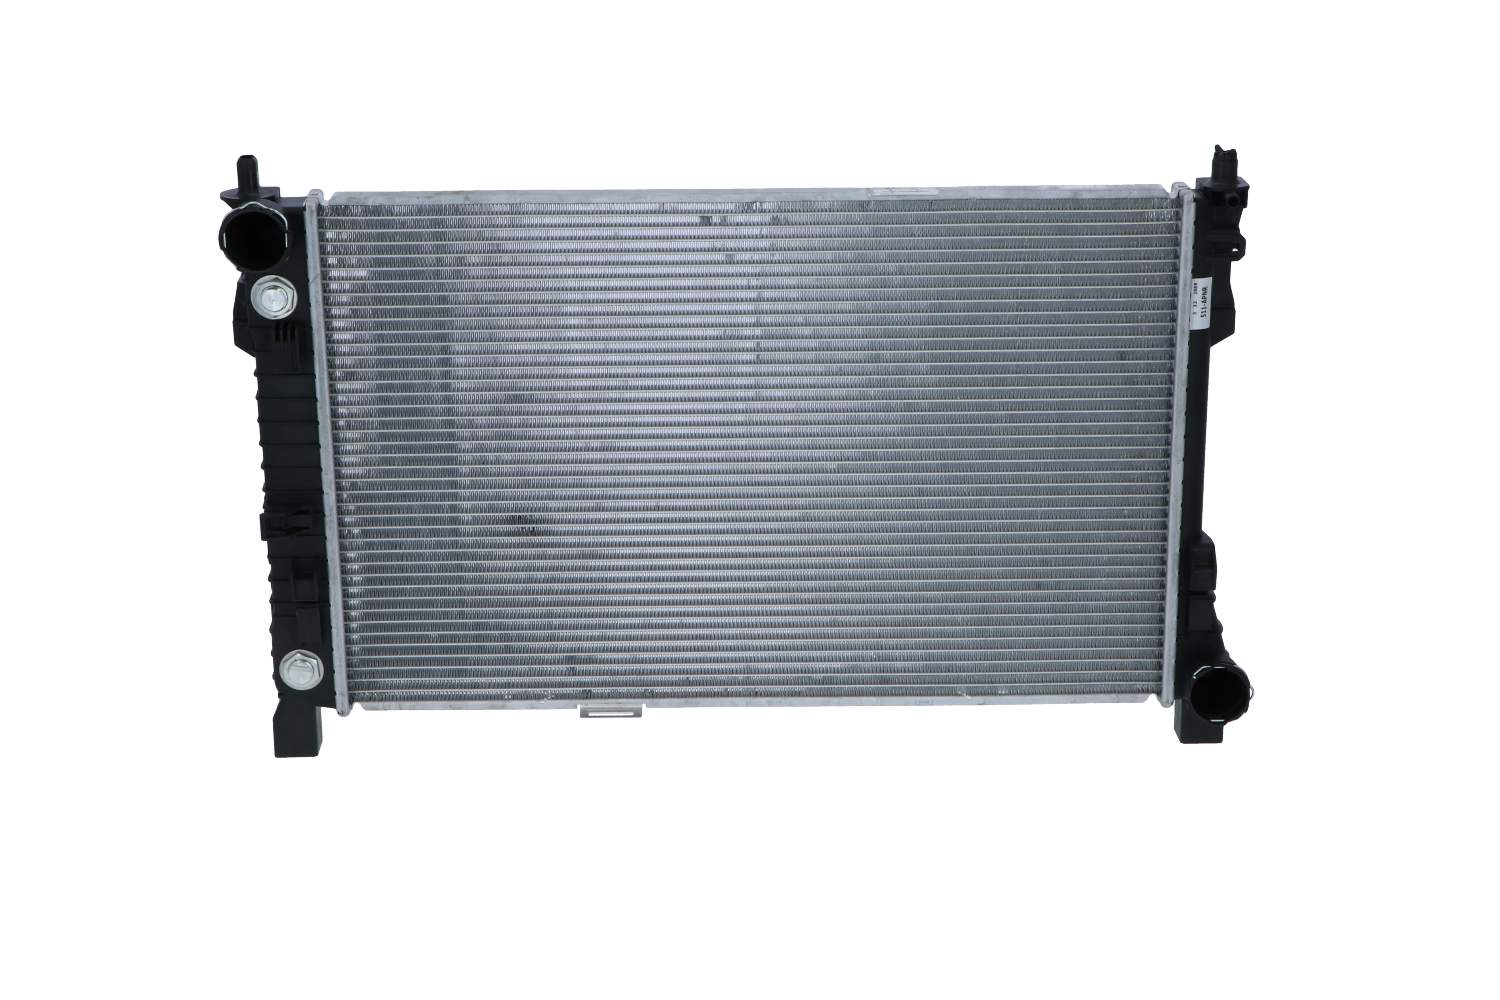 NRF EASY FIT 55310 Engine radiator Aluminium, 650 x 405 x 18 mm, with seal ring, Brazed cooling fins